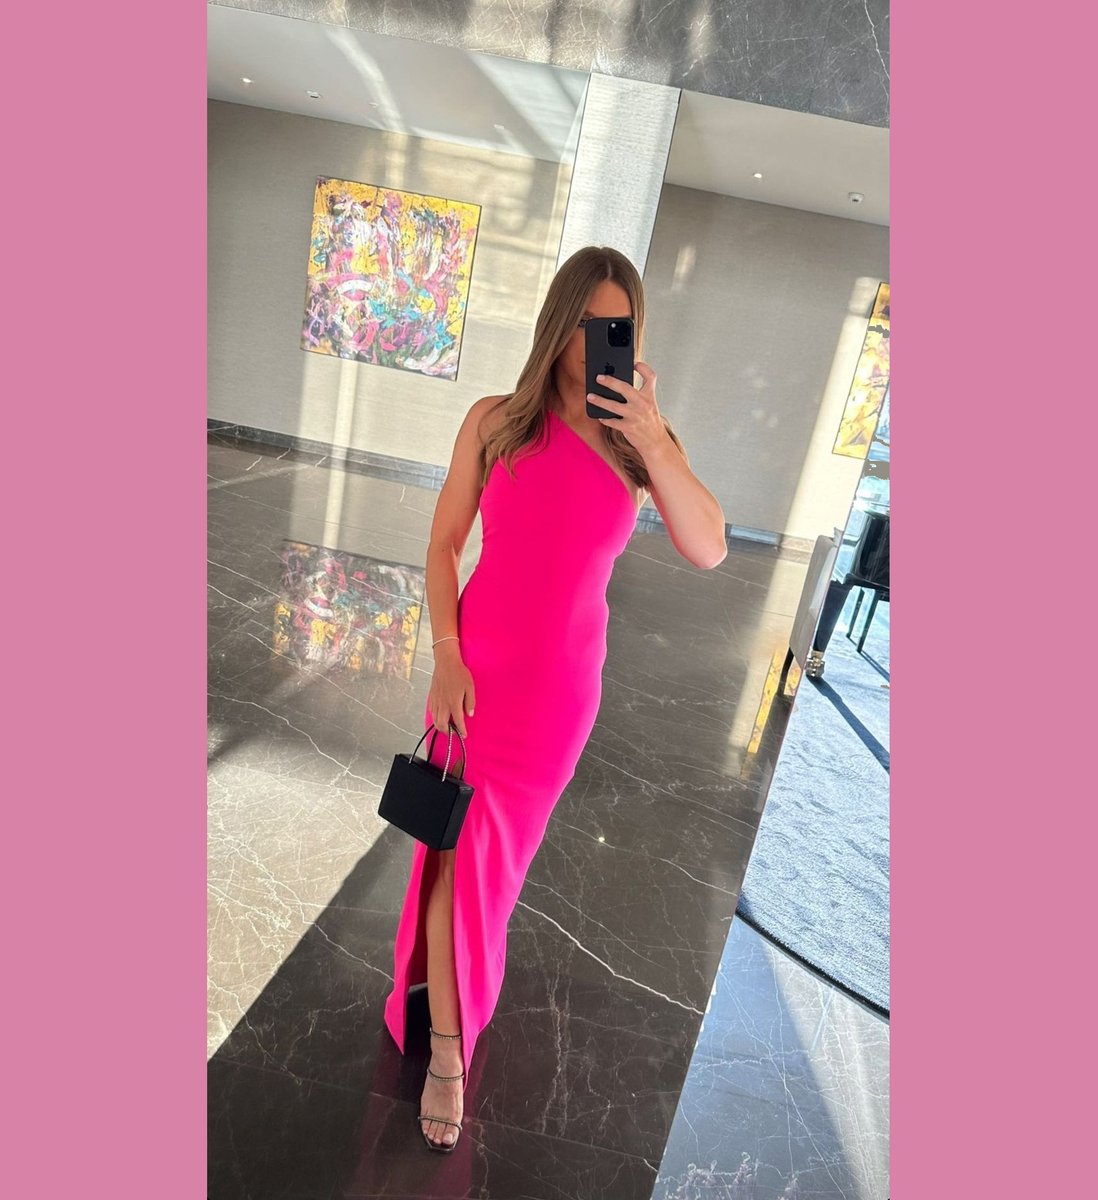 Simona Halep joined the Barbie trend and put on a pink dress for a party that took place on Saturday. https://t.co/cBEzP0VFqS https://t.co/a5St7TYw47